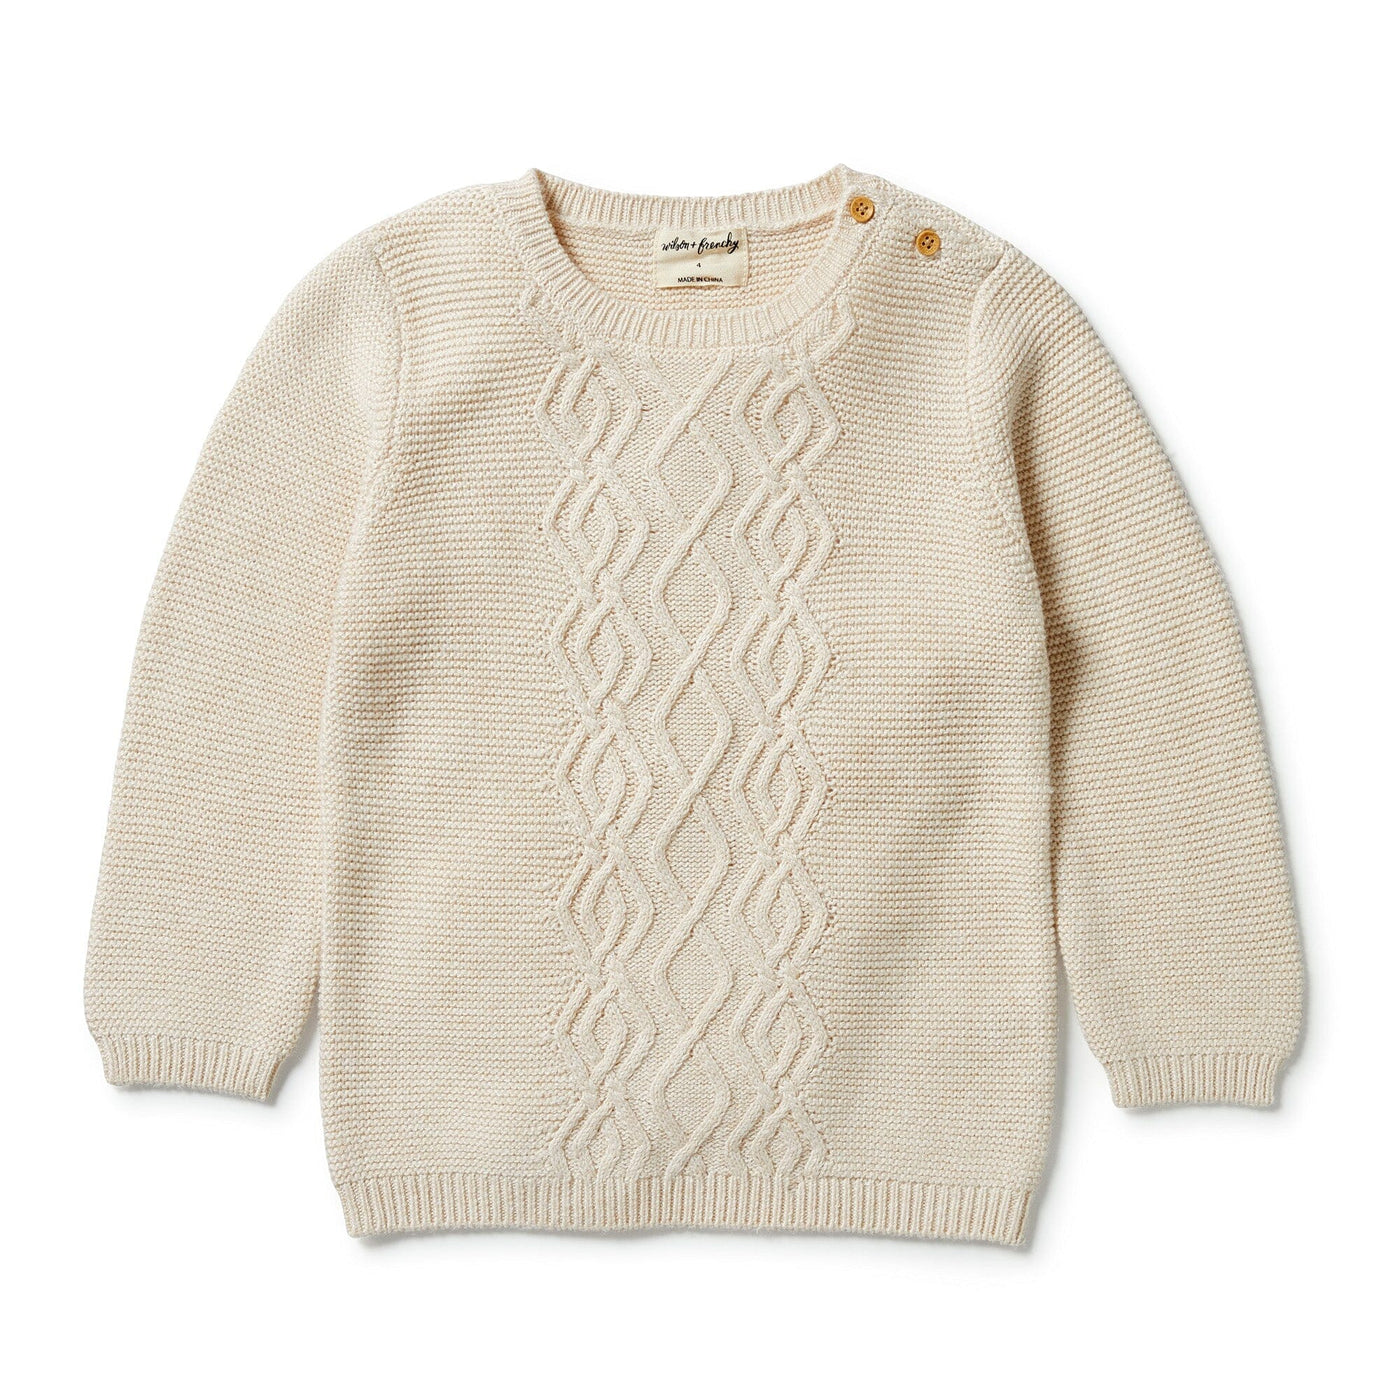 Knitted Cable Jumper - Sand Melange Knitted Jumper Wilson & Frenchy 